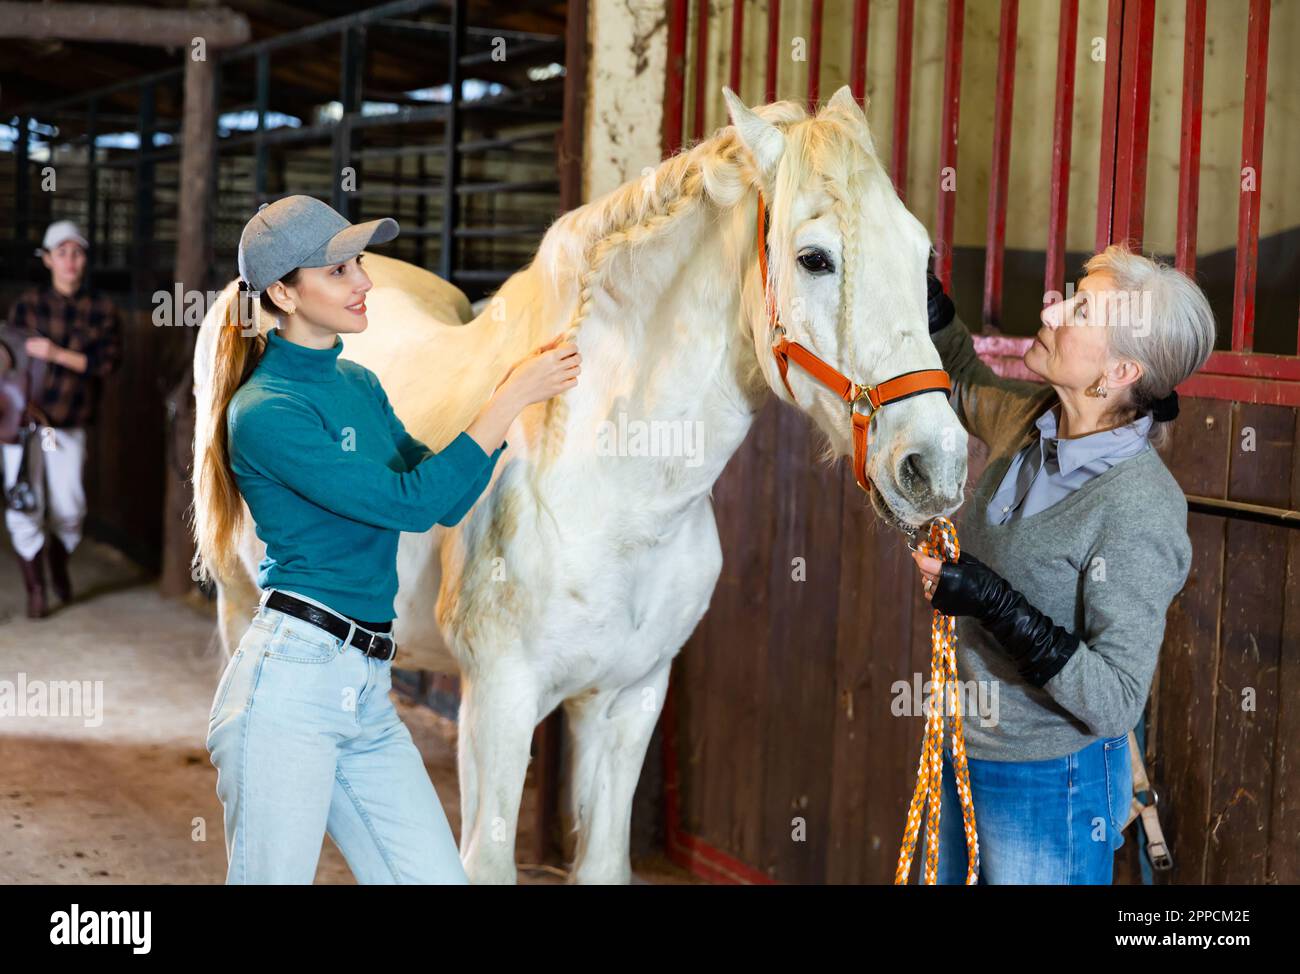 Women weaving braids on the mane of a white horse in stable Stock Photo ...